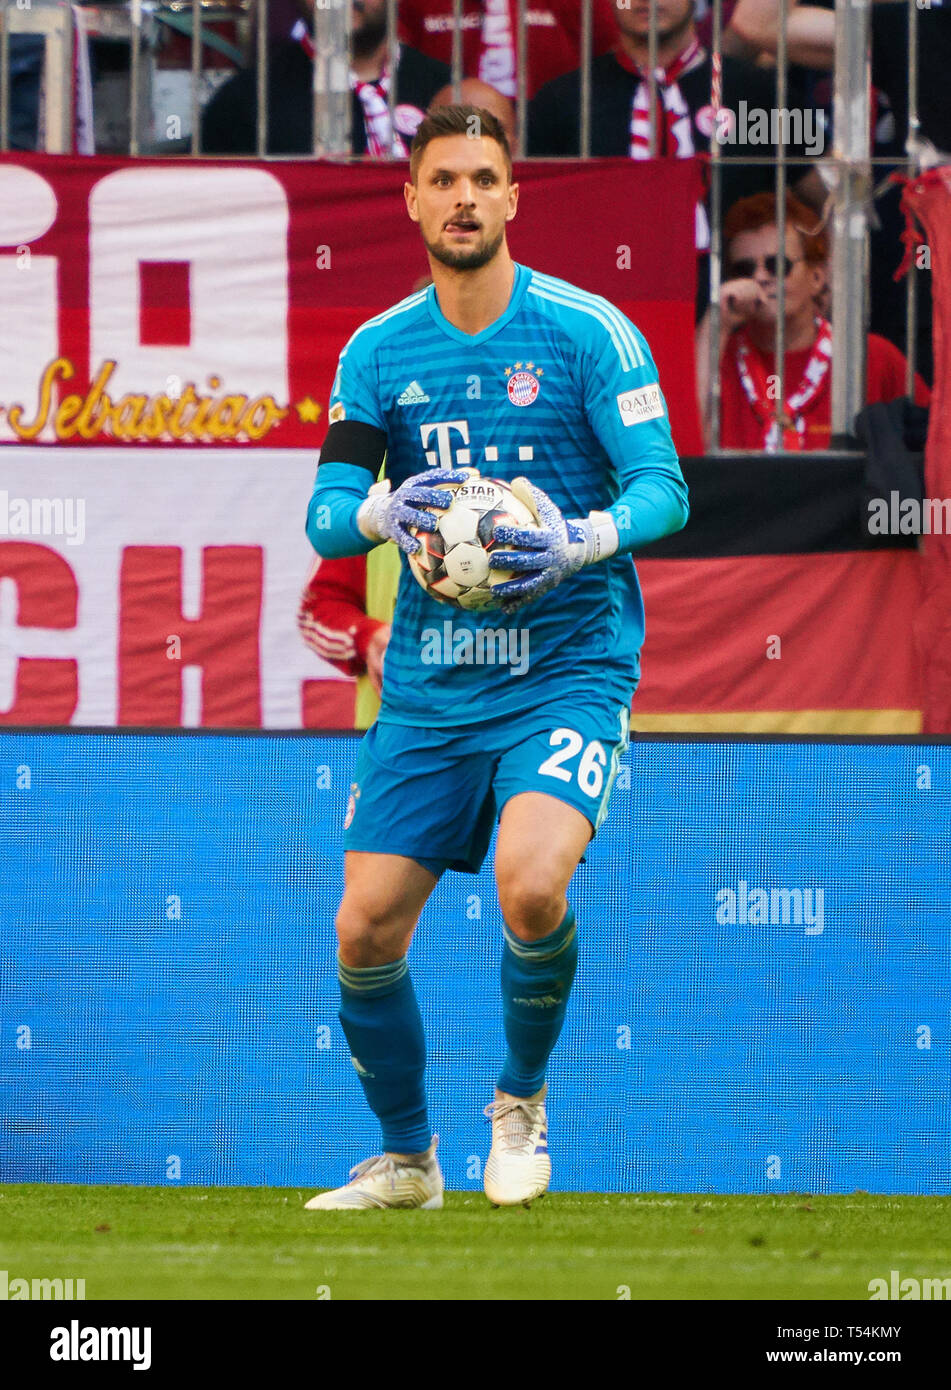 Munich, Germany. 20th Apr, 2019. Sven ULREICH, FCB 26 Torwart. whole figure, action, single image, single action,  FC BAYERN MUNICH - SV WERDER BREMEN 1-0  - DFL REGULATIONS PROHIBIT ANY USE OF PHOTOGRAPHS as IMAGE SEQUENCES and/or QUASI-VIDEO -  1.German Soccer League , Munich, April 20, 2019  Season 2018/2019, matchday 30, FCB, München, © Peter Schatz / Alamy Live News Credit: Peter Schatz/Alamy Live News Stock Photo